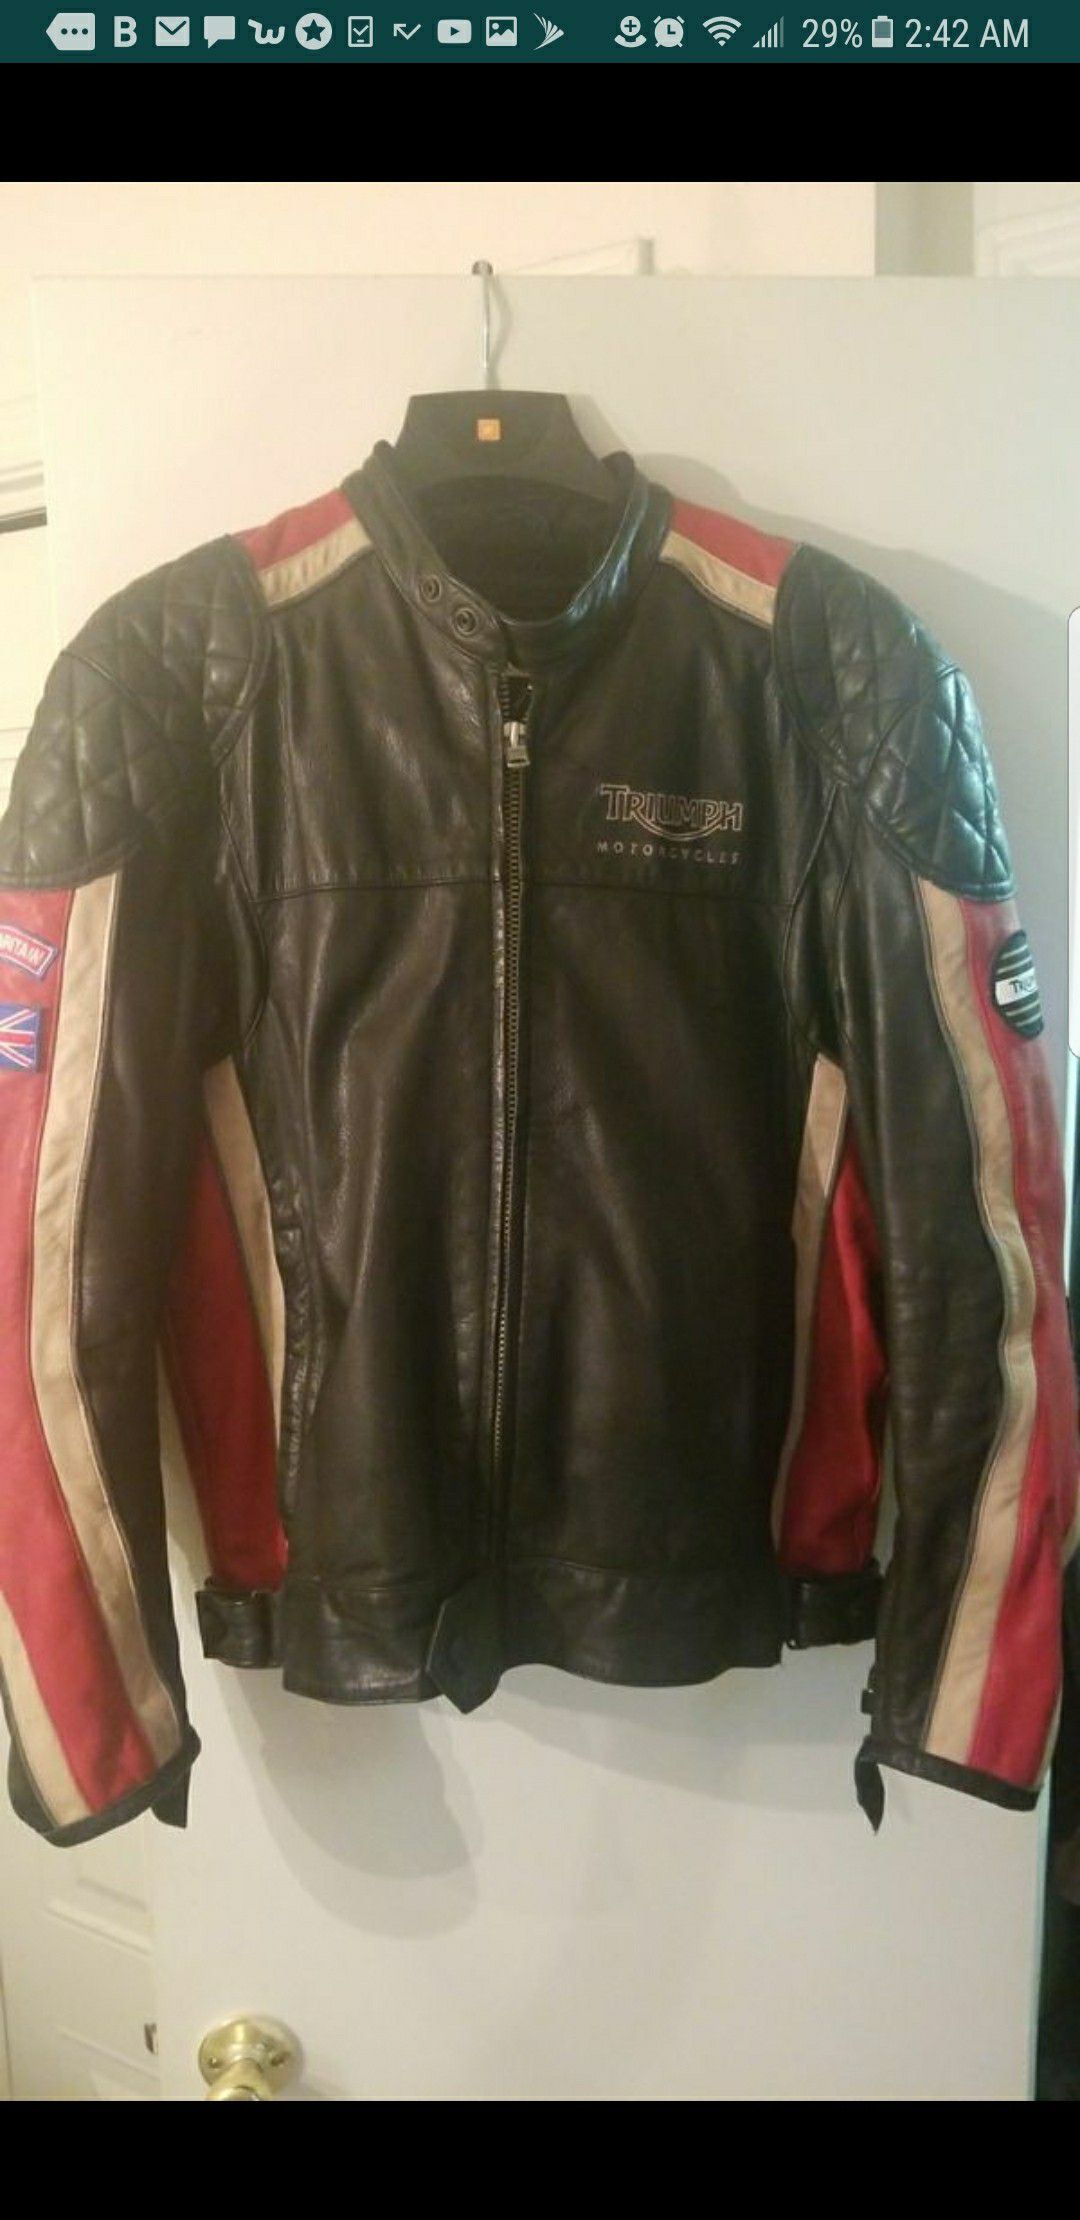 TRIUMPH LEATHER JACKET IN GOOD CONDITION